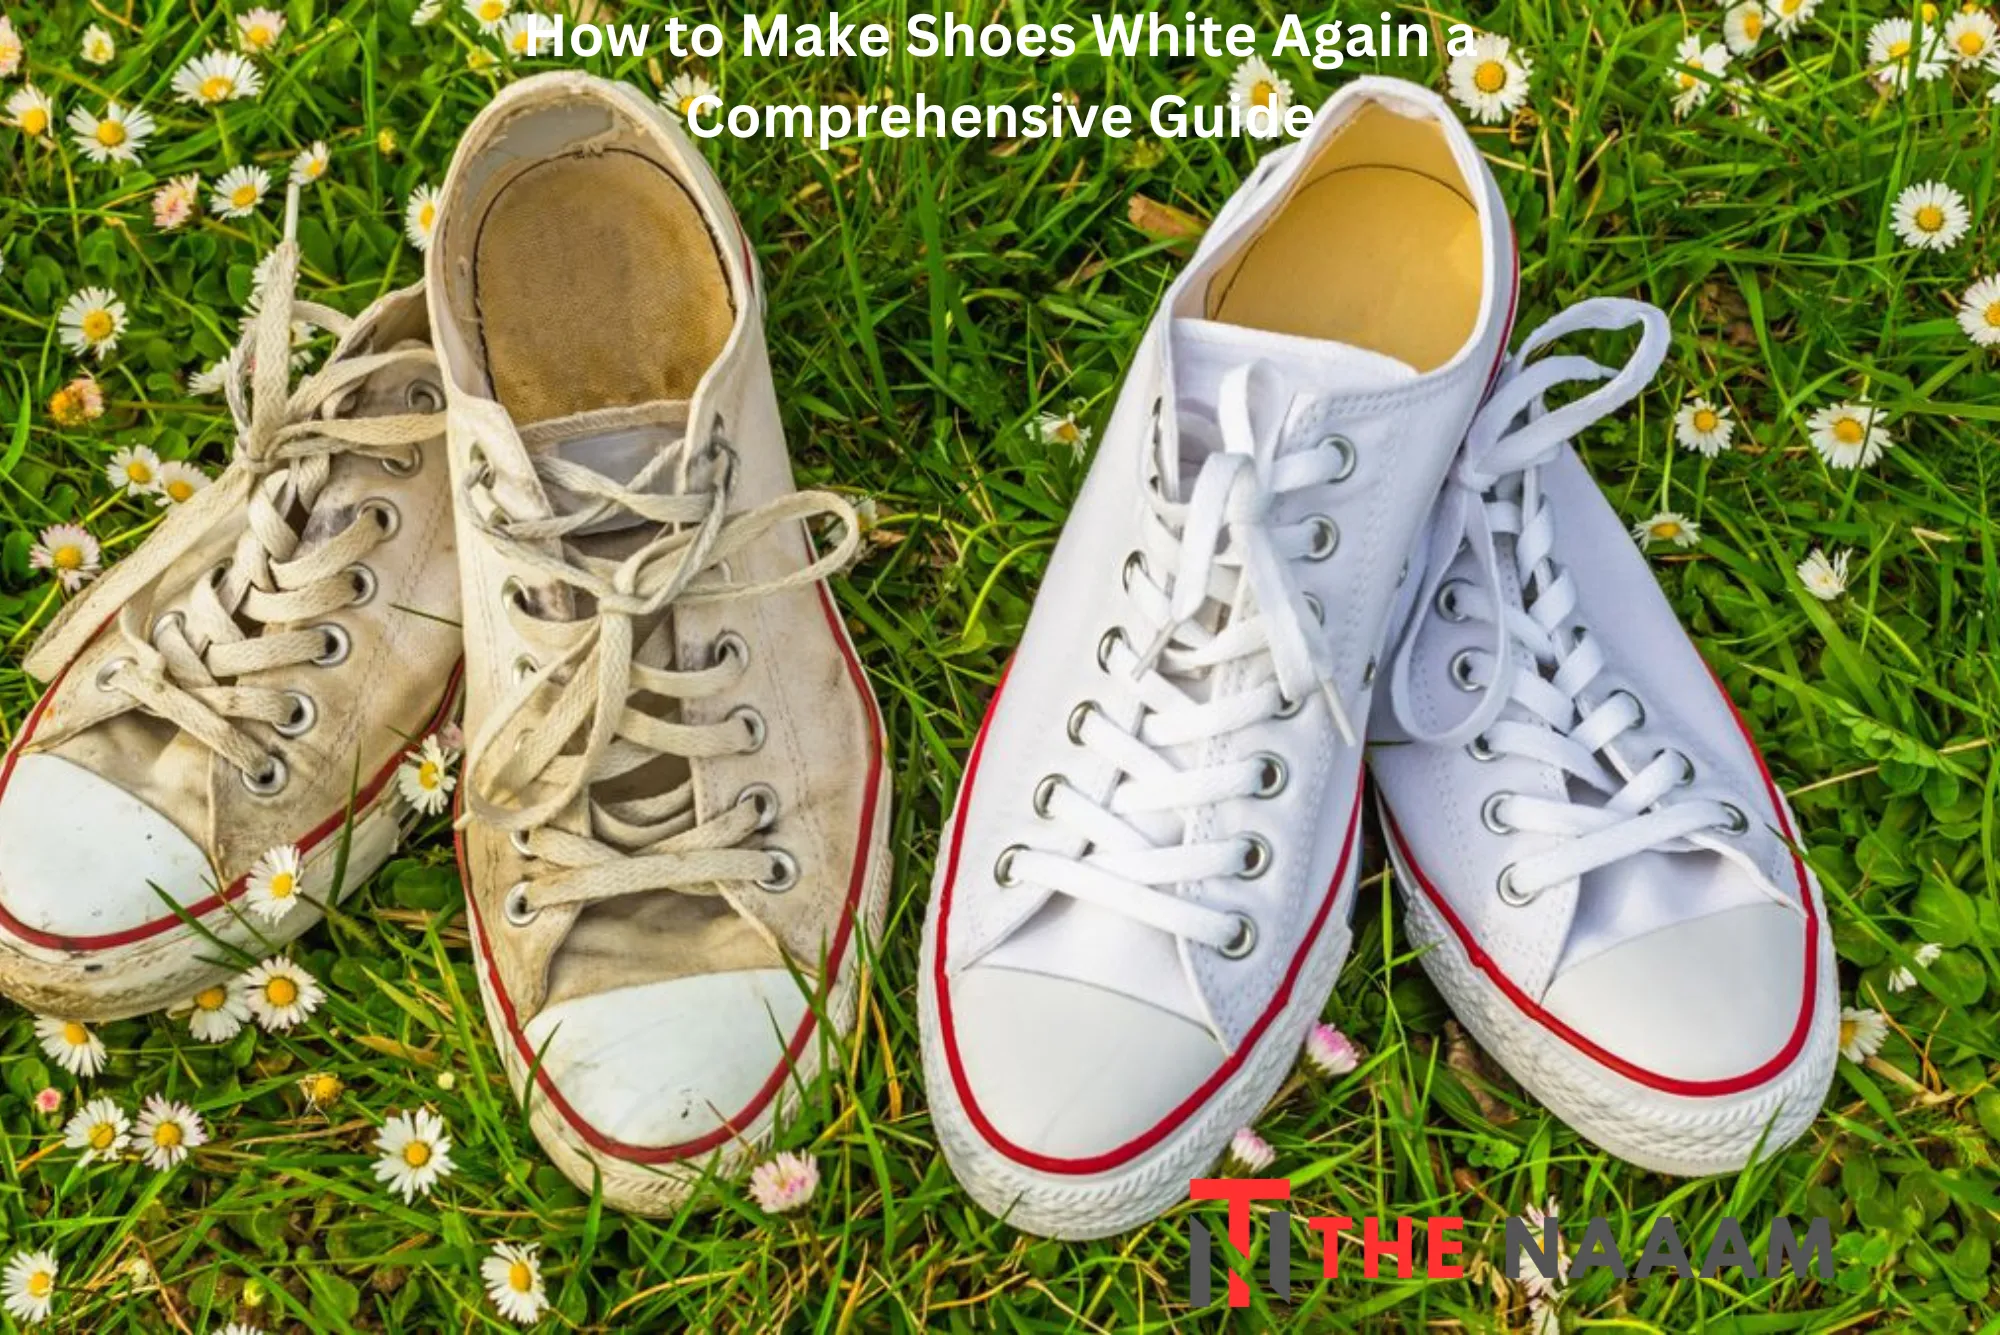 How to Make Shoes White Again a Comprehensive Guide